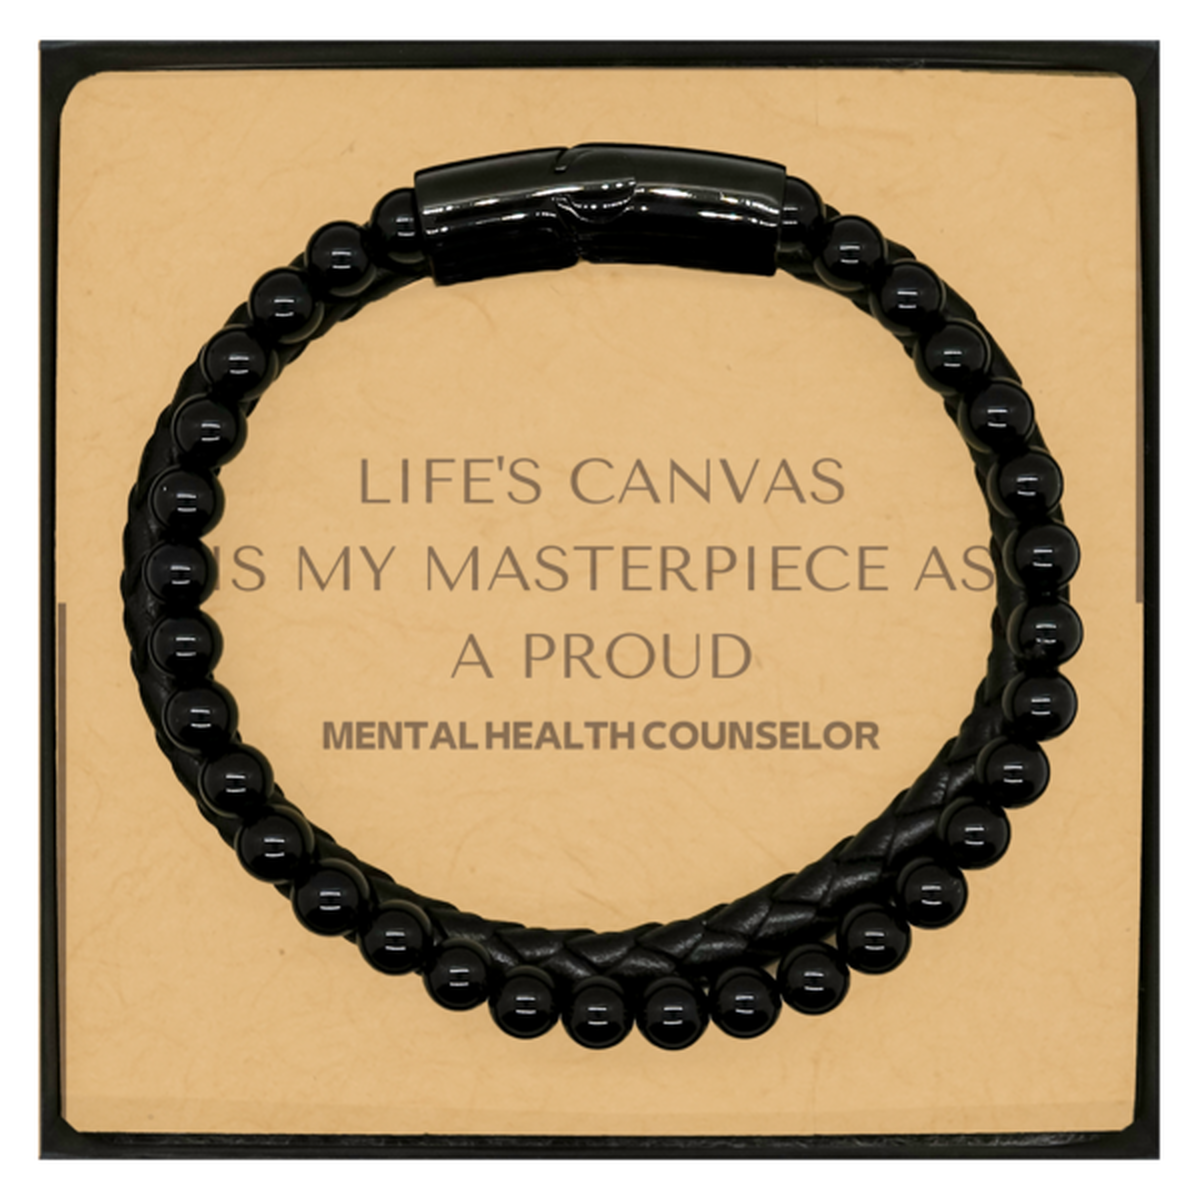 Proud Mental Health Counselor Gifts, Life's canvas is my masterpiece, Epic Birthday Christmas Unique Stone Leather Bracelets For Mental Health Counselor, Coworkers, Men, Women, Friends